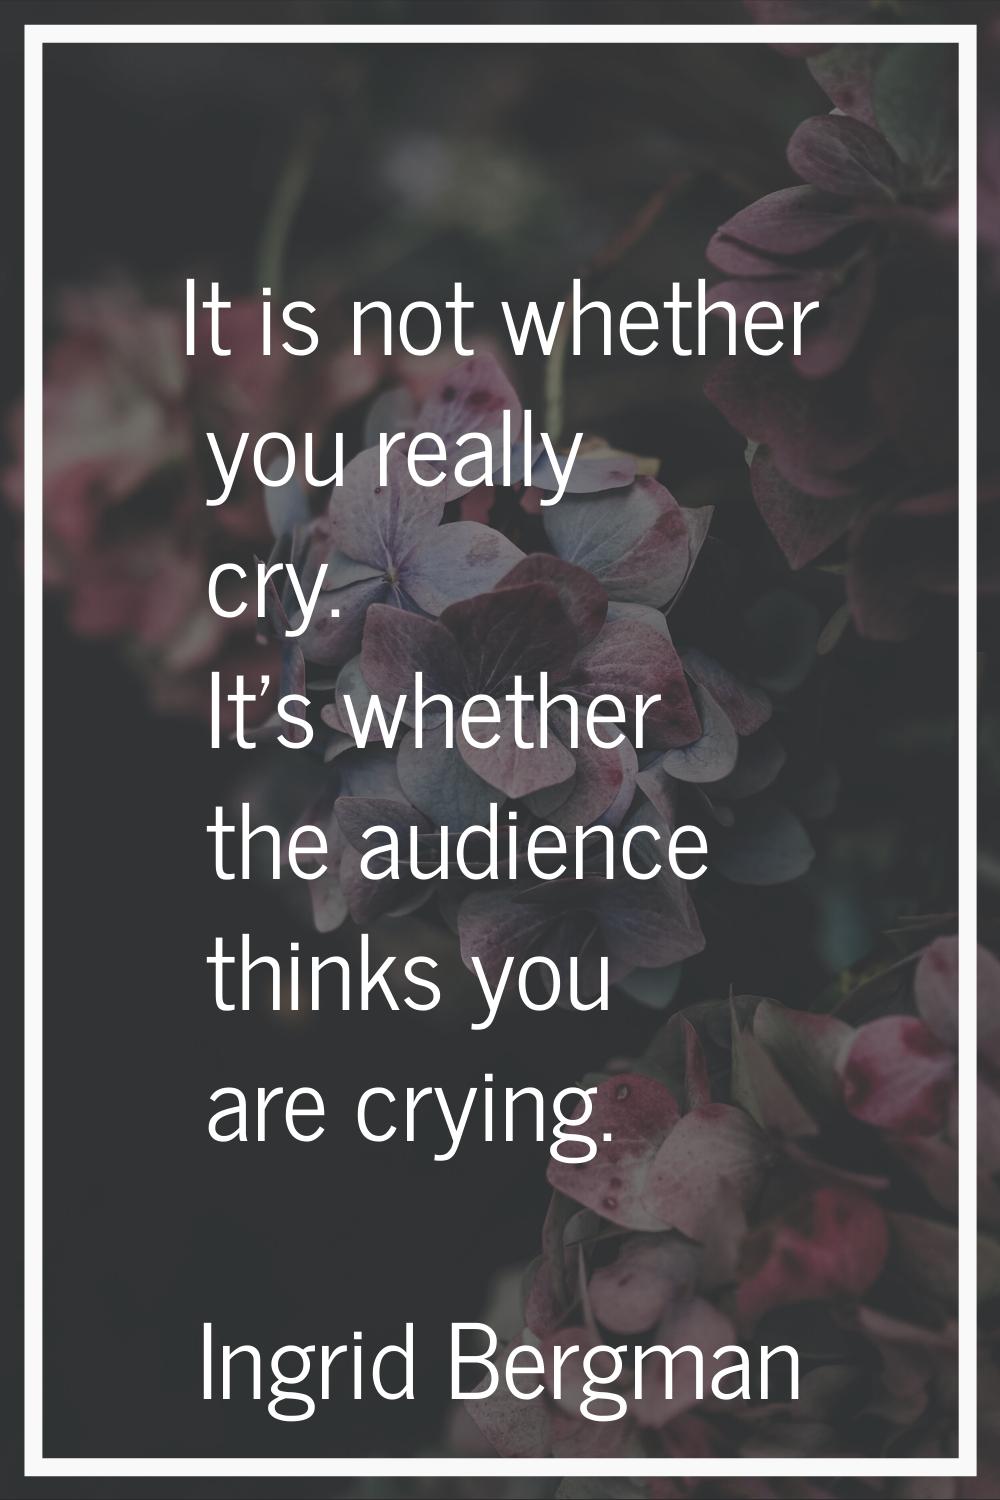 It is not whether you really cry. It's whether the audience thinks you are crying.